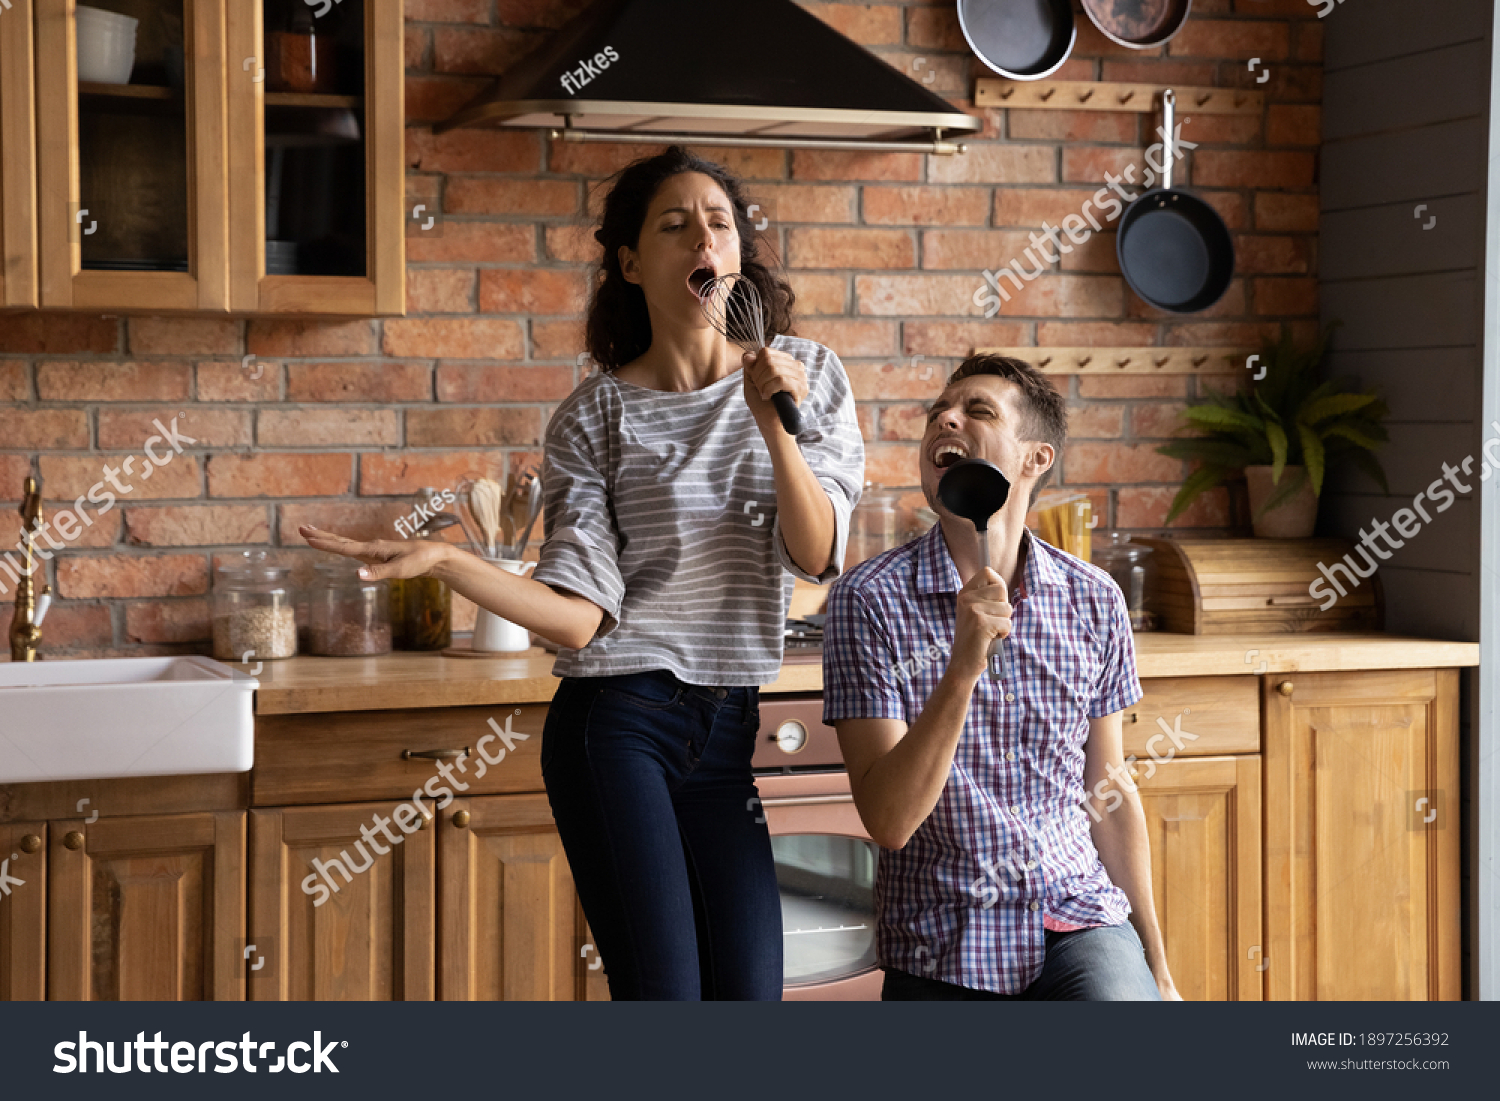 Overjoyed millennial Caucasian man and woman have fun dancing singing in modern kitchen at home. Excited happy young couple feel playful enjoy good morning in new own house or flat. Rental concept. #1897256392